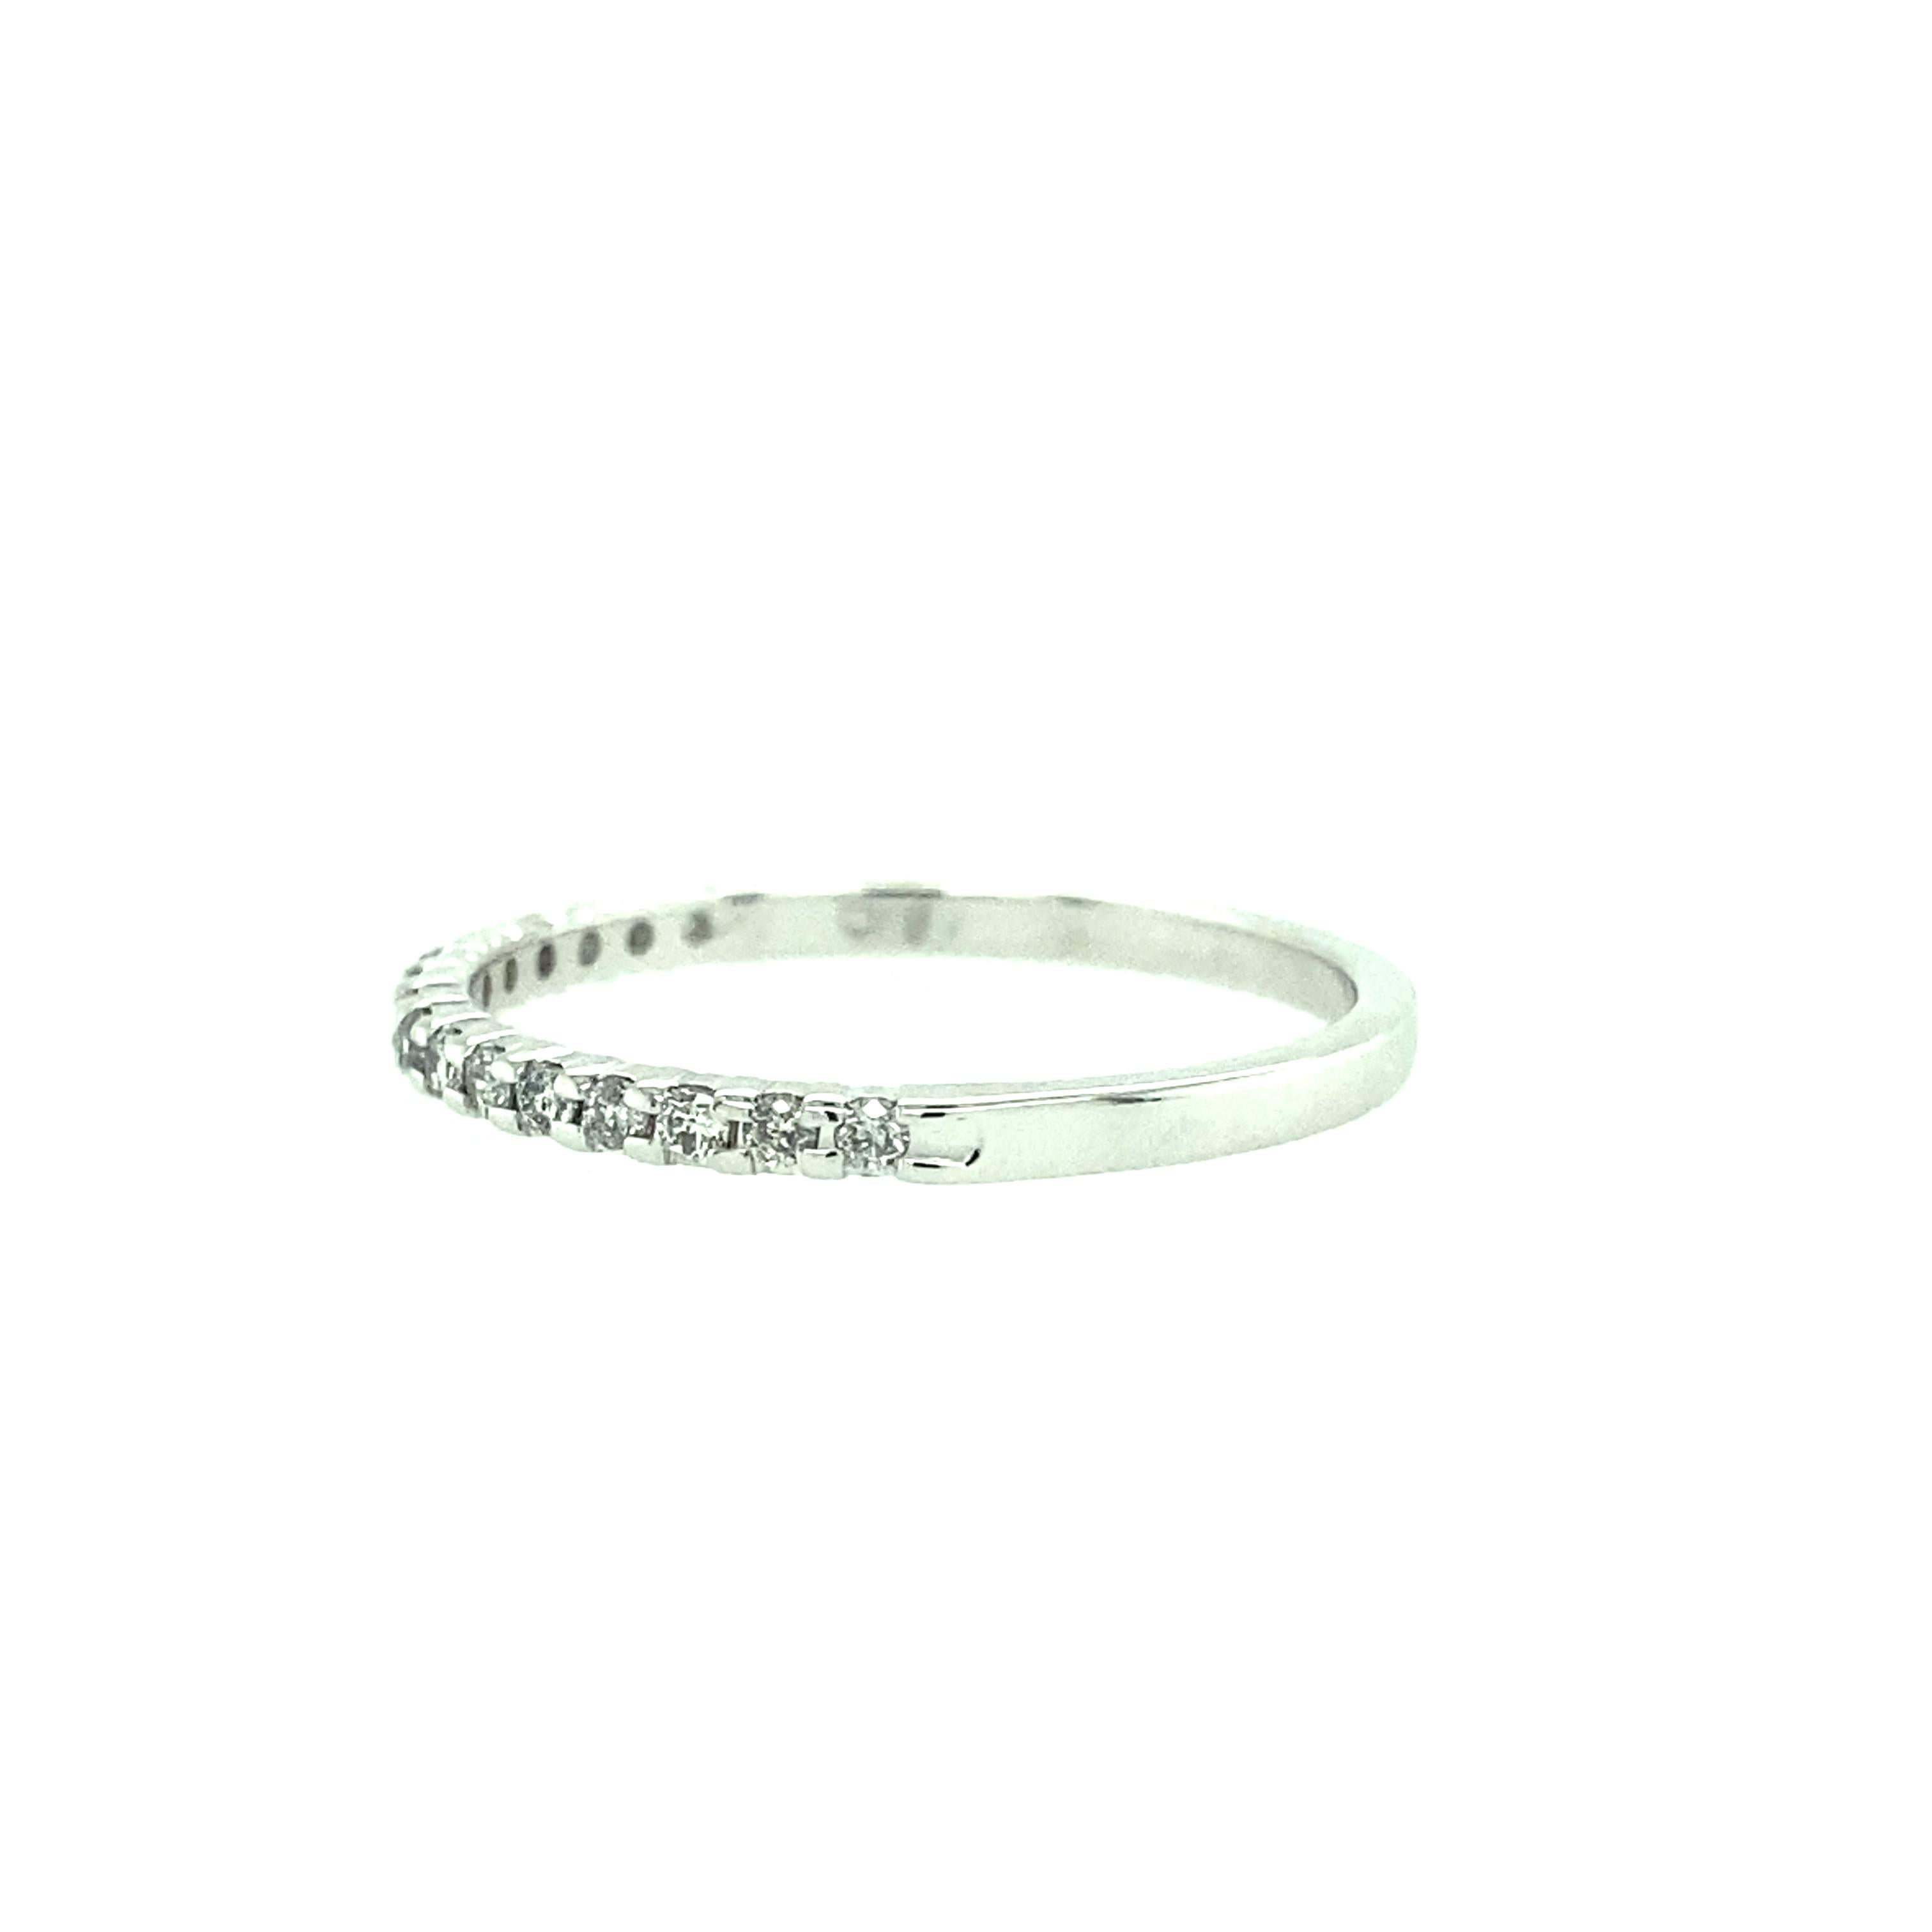 One 10 karat white gold (stamped 10K HDO) diamond wedding band set with sixteen round brilliant diamonds, 0.10 carat total weight with matching H/I color and I clarity. The band measures 1.60mm wide and is a finger size 7.